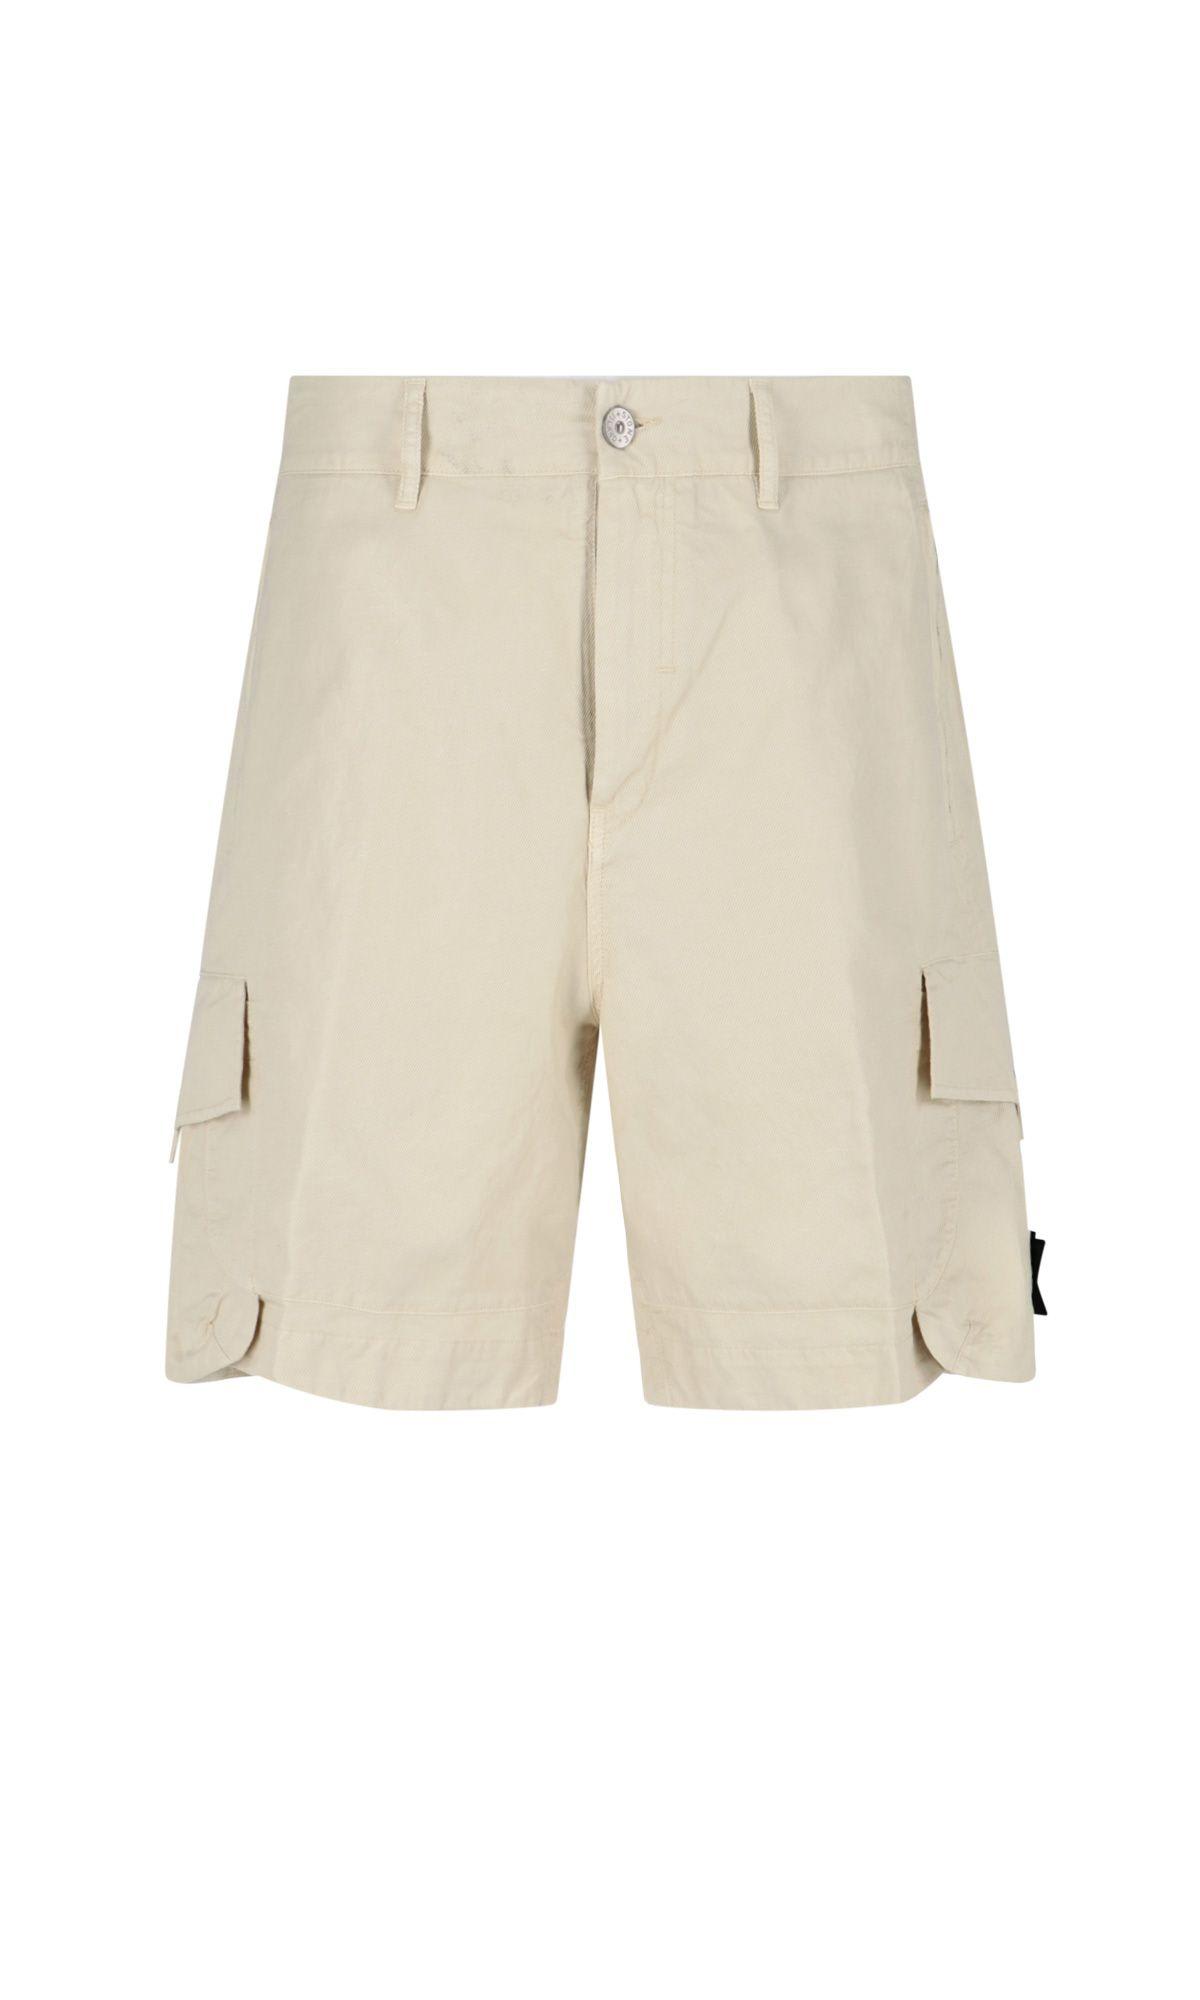 STONE ISLAND SHADOW PROJECT SHADOW PROJECT CARGO SHORTS